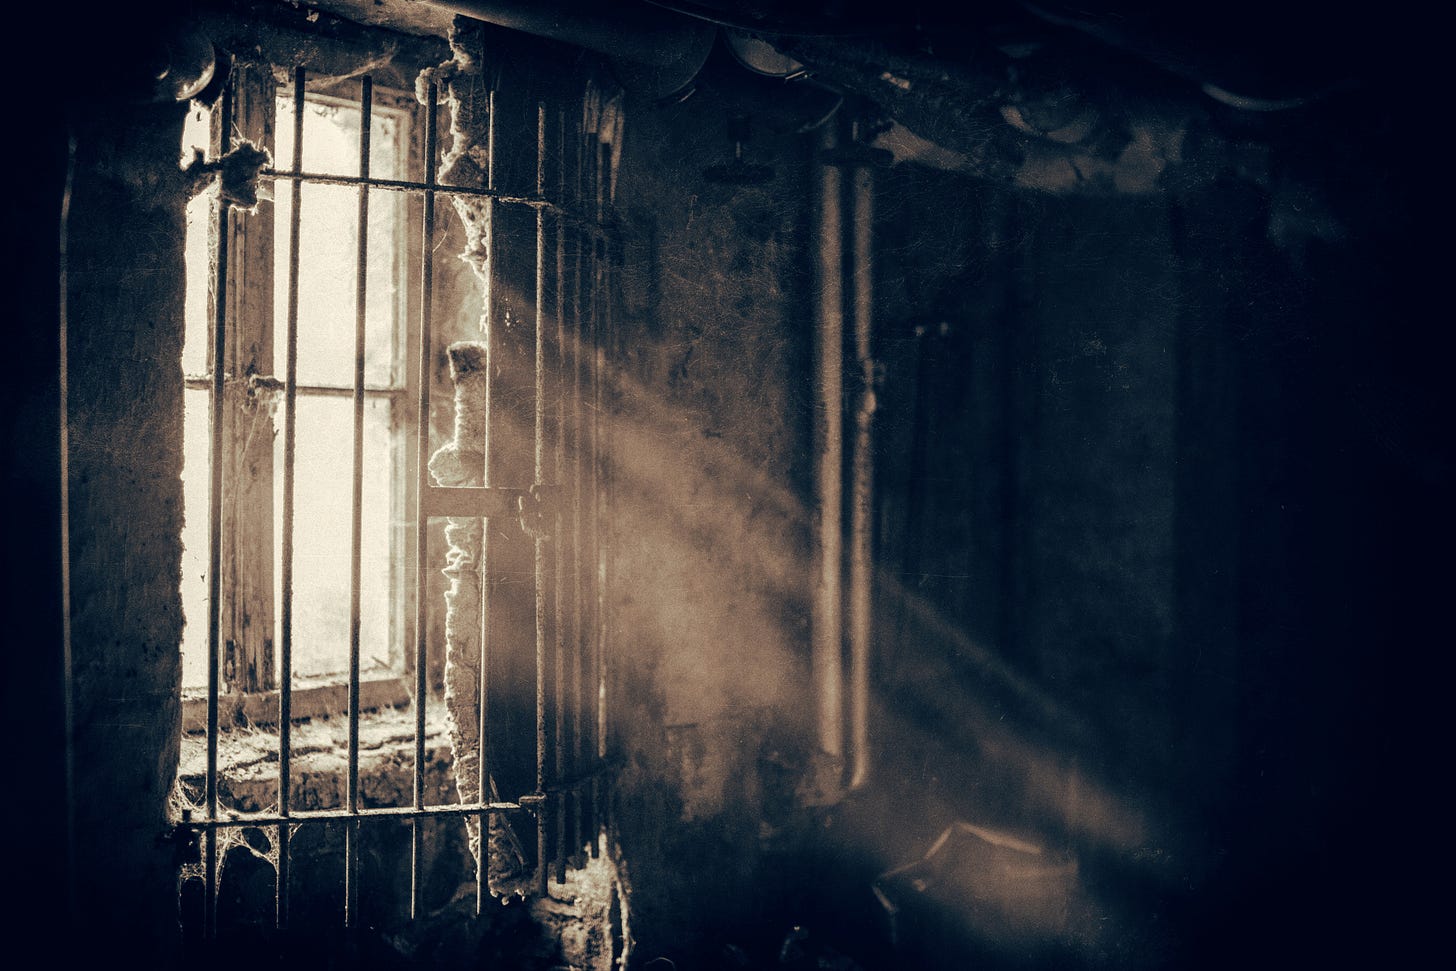 Light shines through a prison window with bars over it. The prison resembles a dungeon.